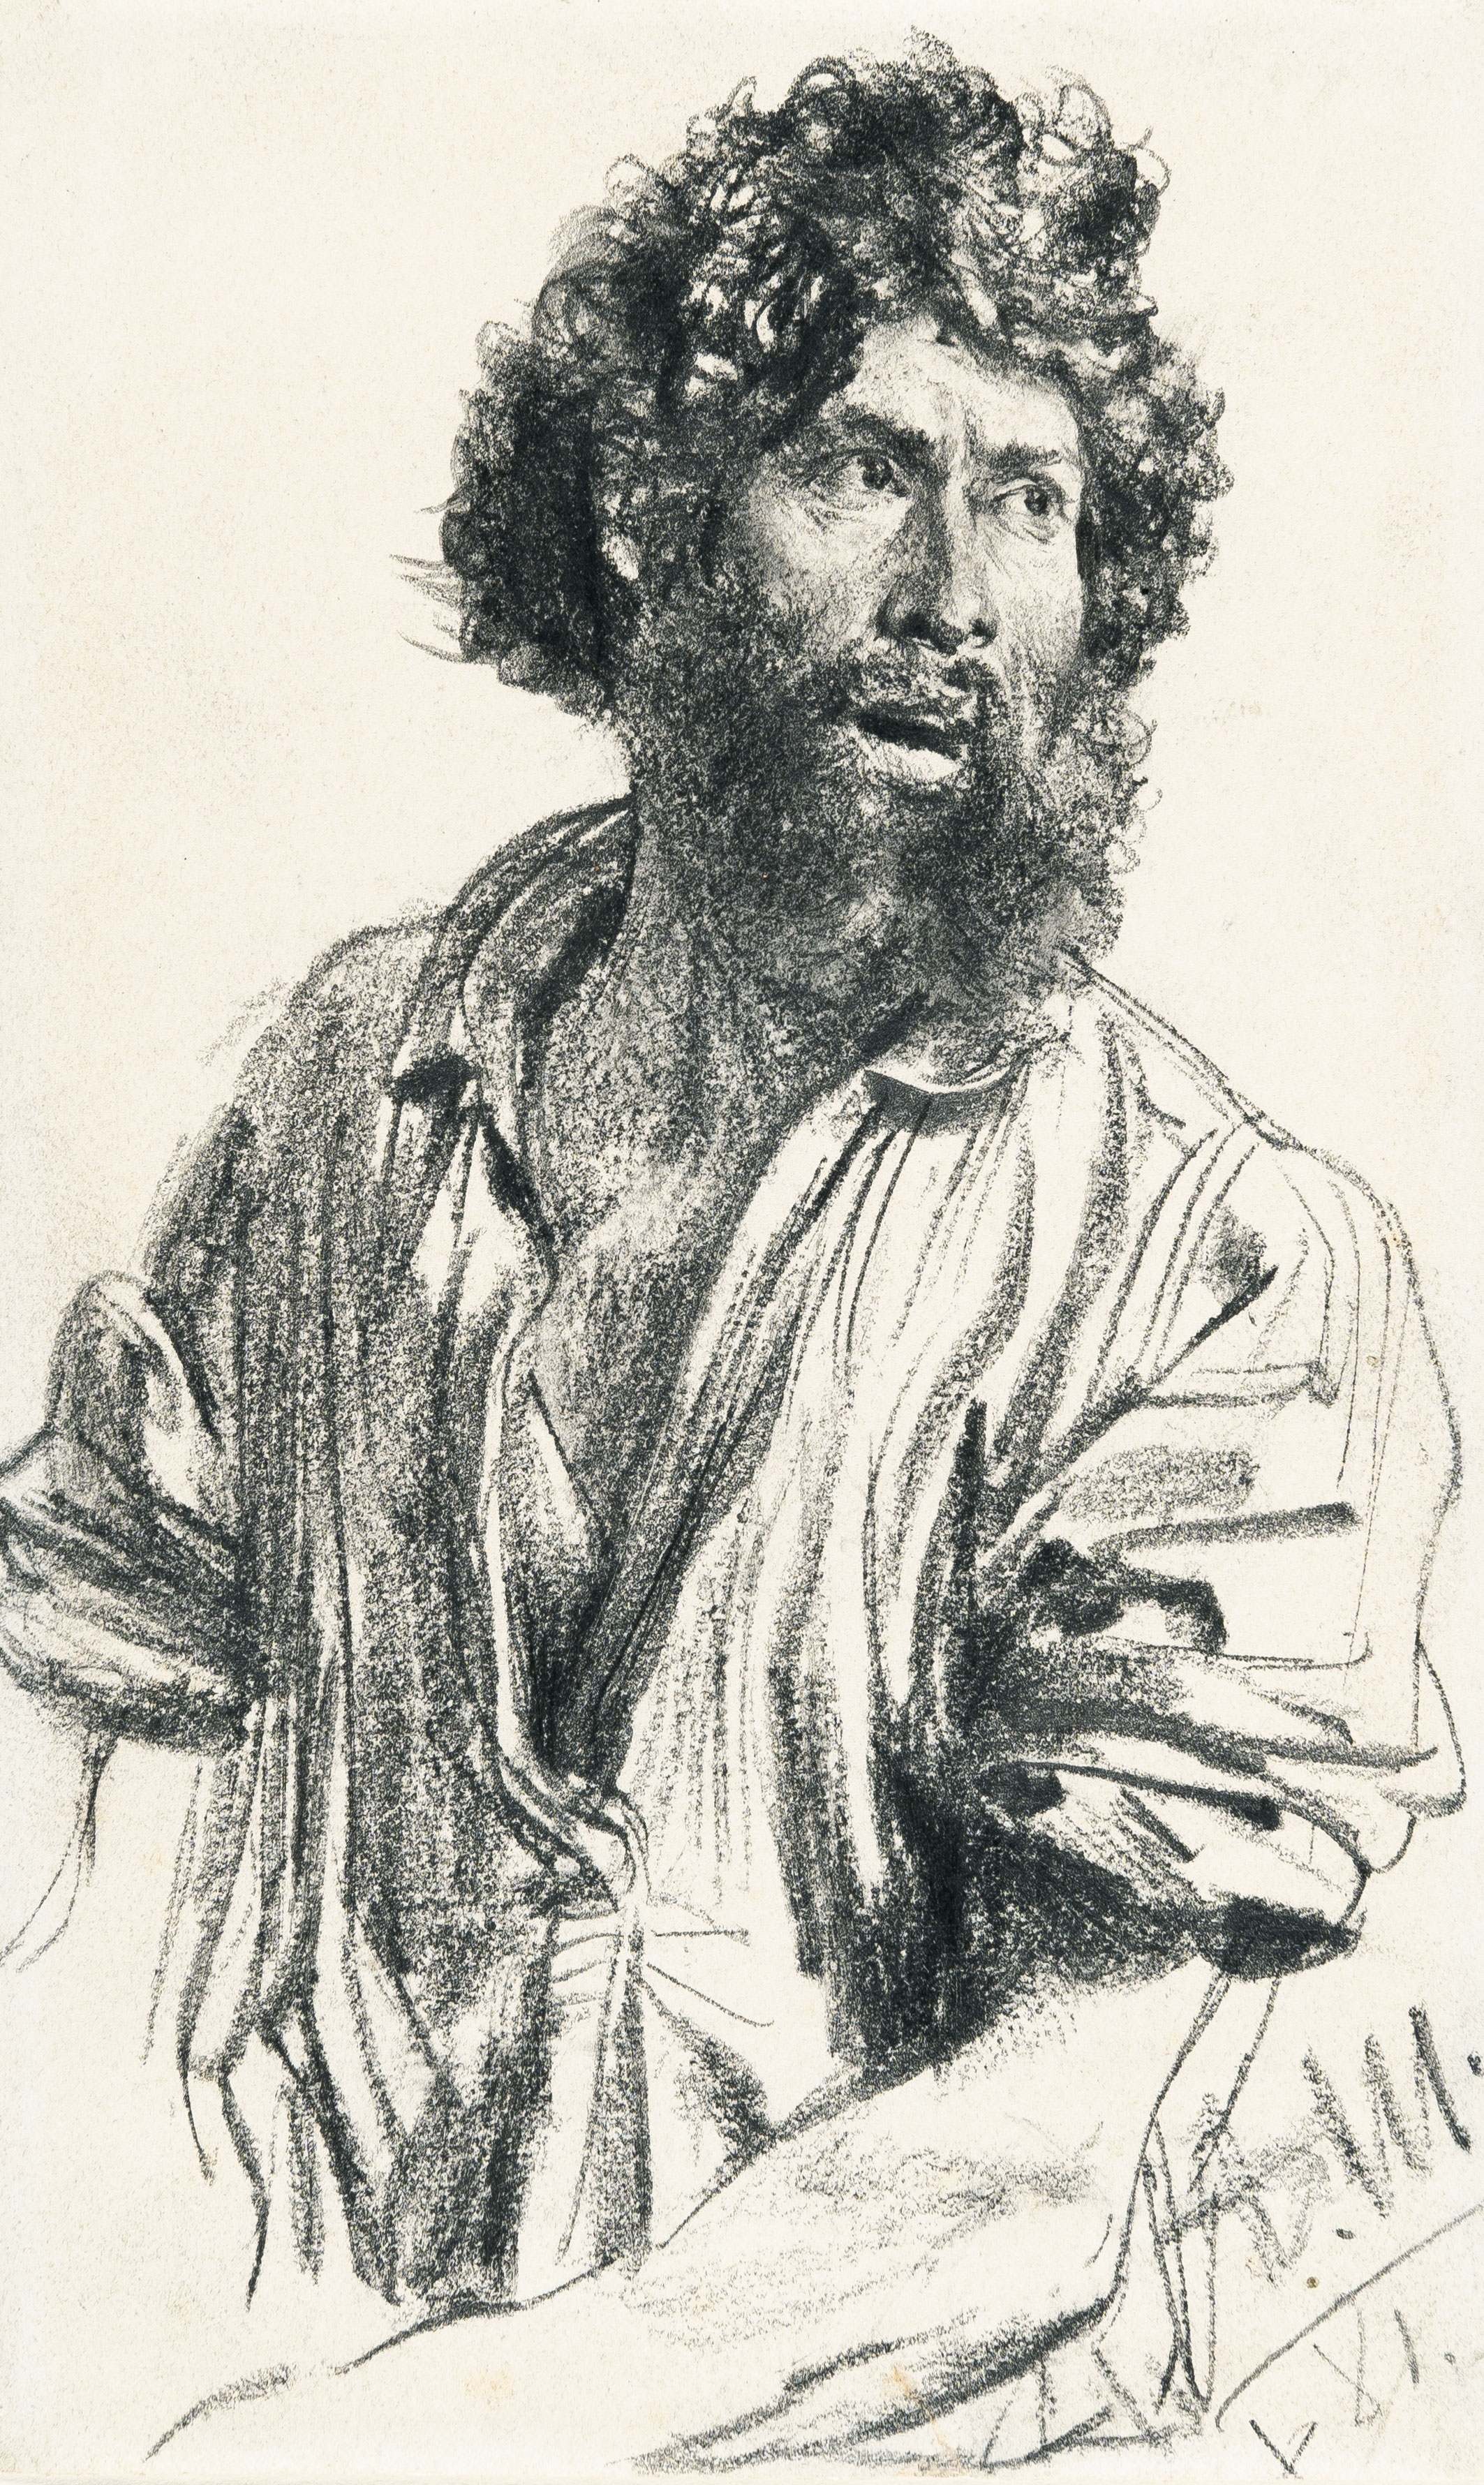 Study of a bearded man with sleeves rolled up by Adolph von Menzel, 1881